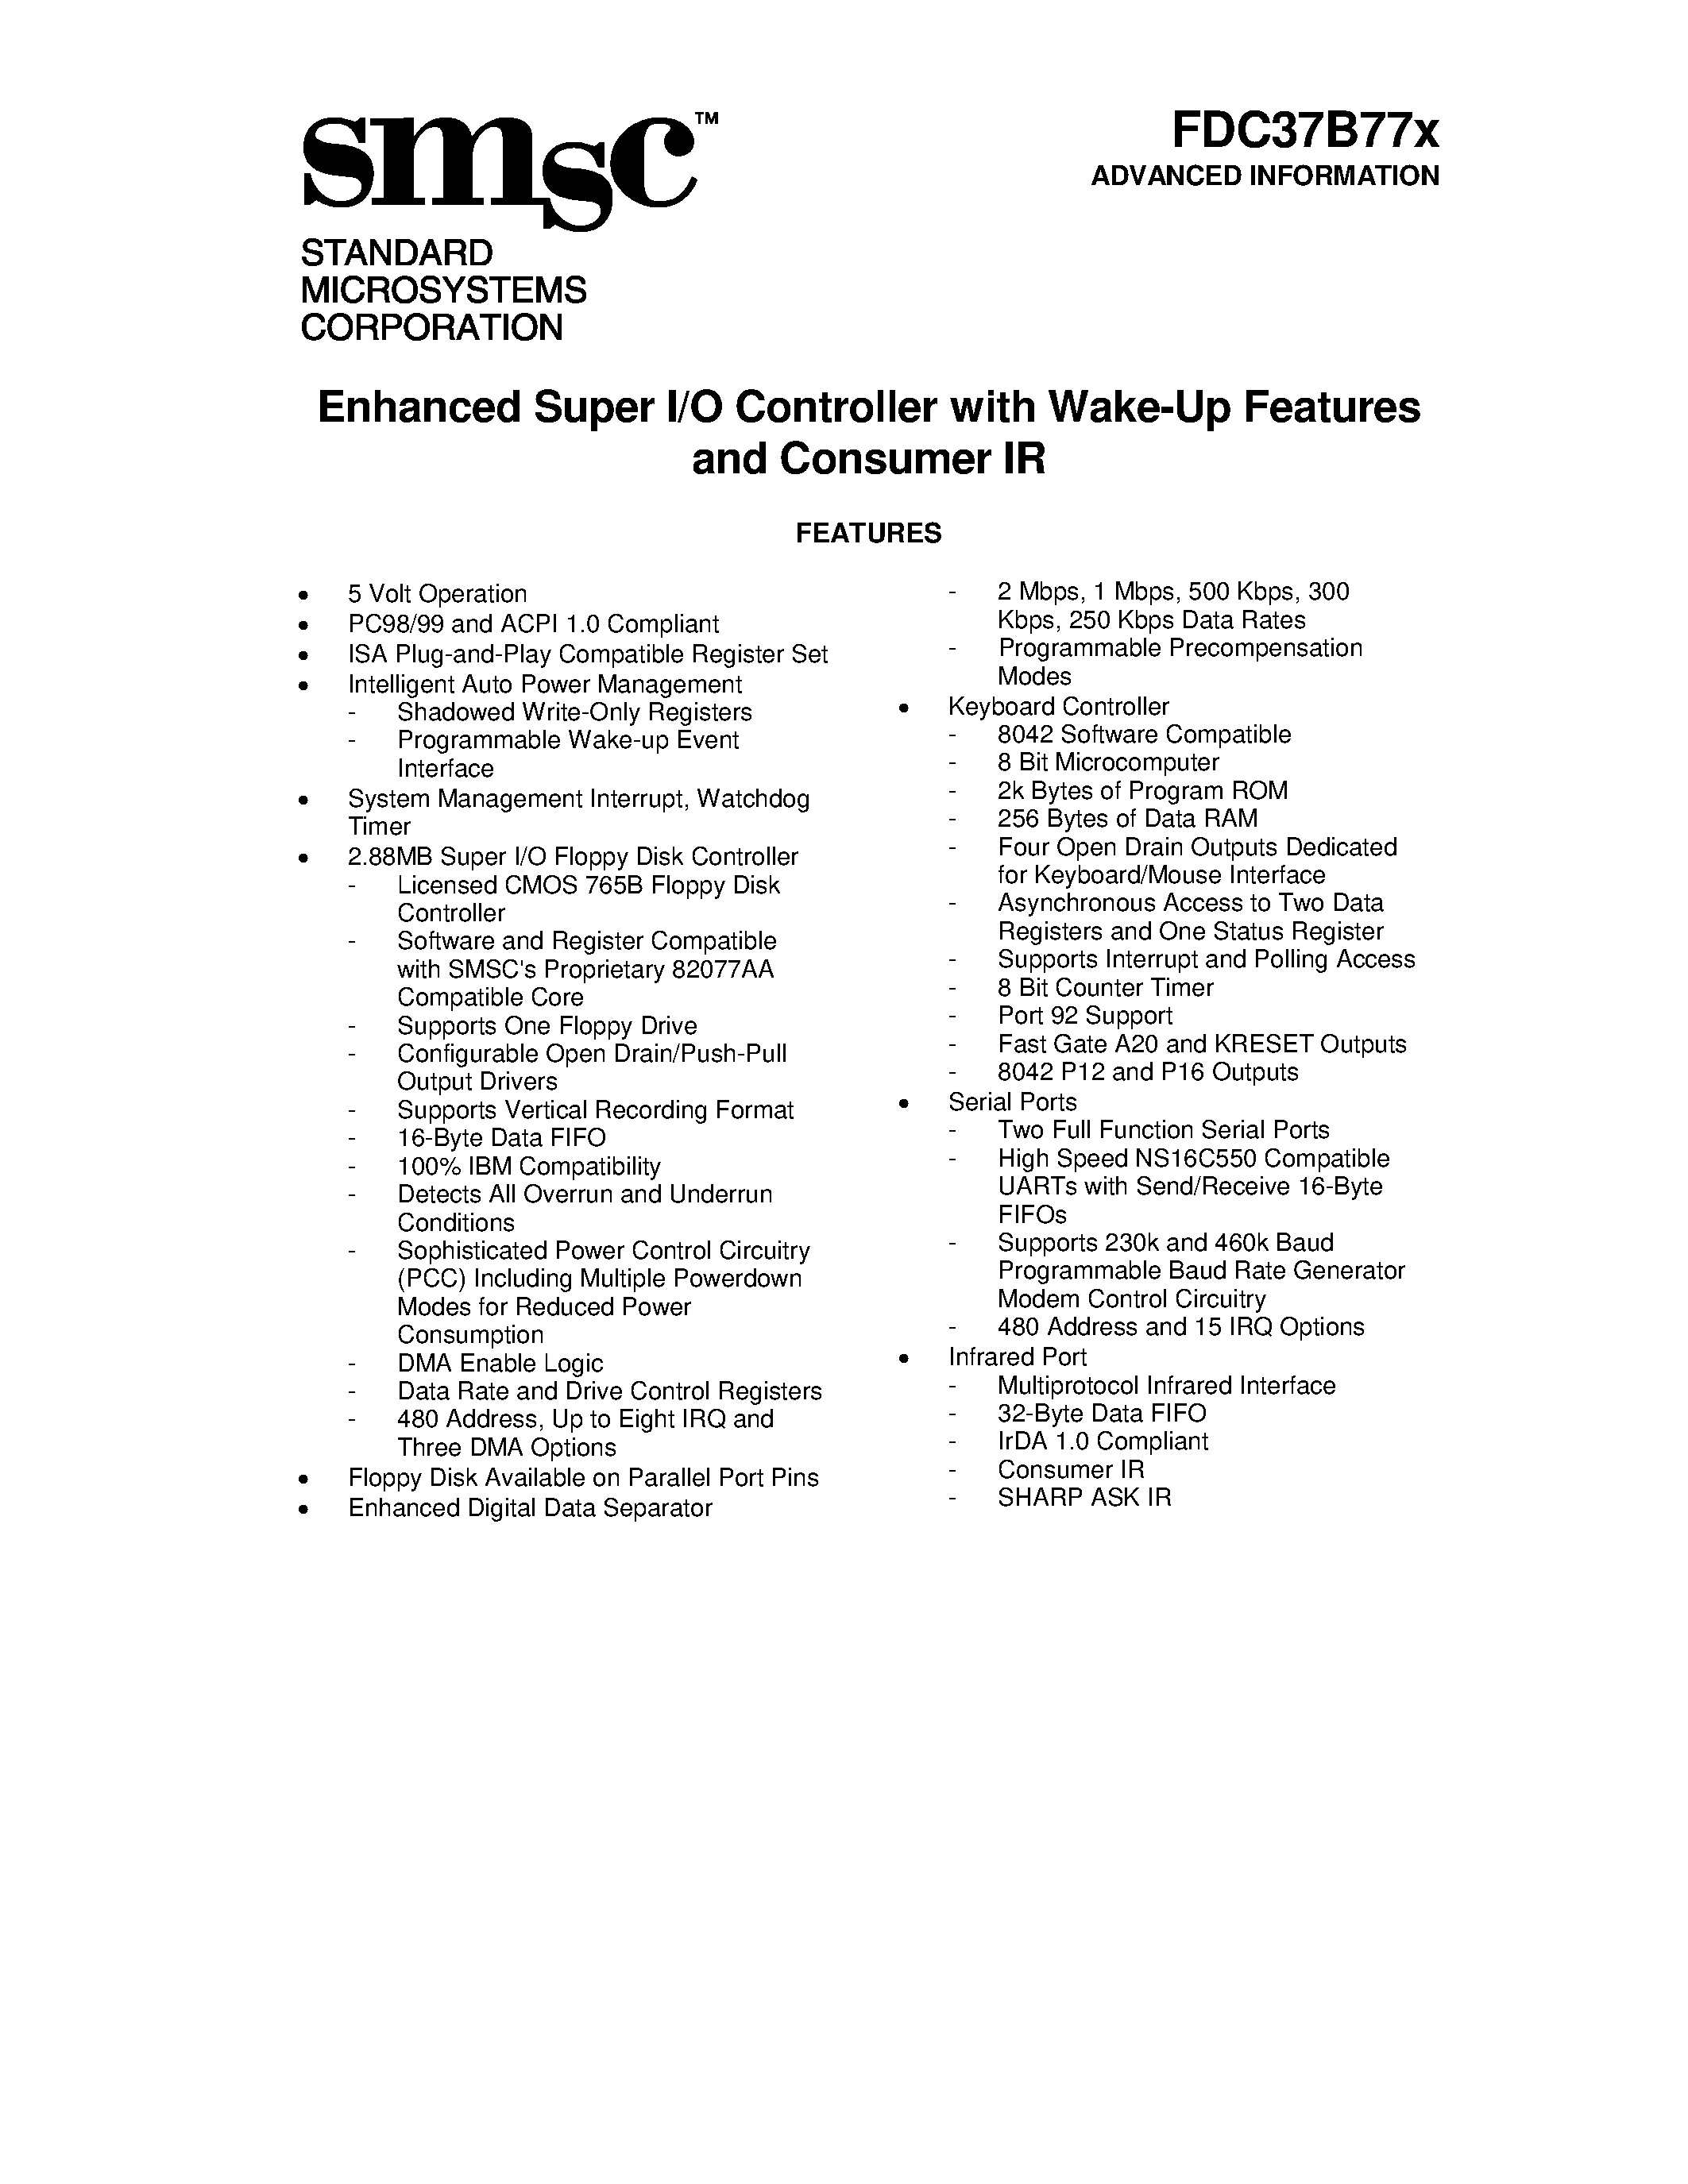 Datasheet 37B77X - ENHANCED SUPER I/O CONTROLLER WITH WAKE UP FEATURES page 1